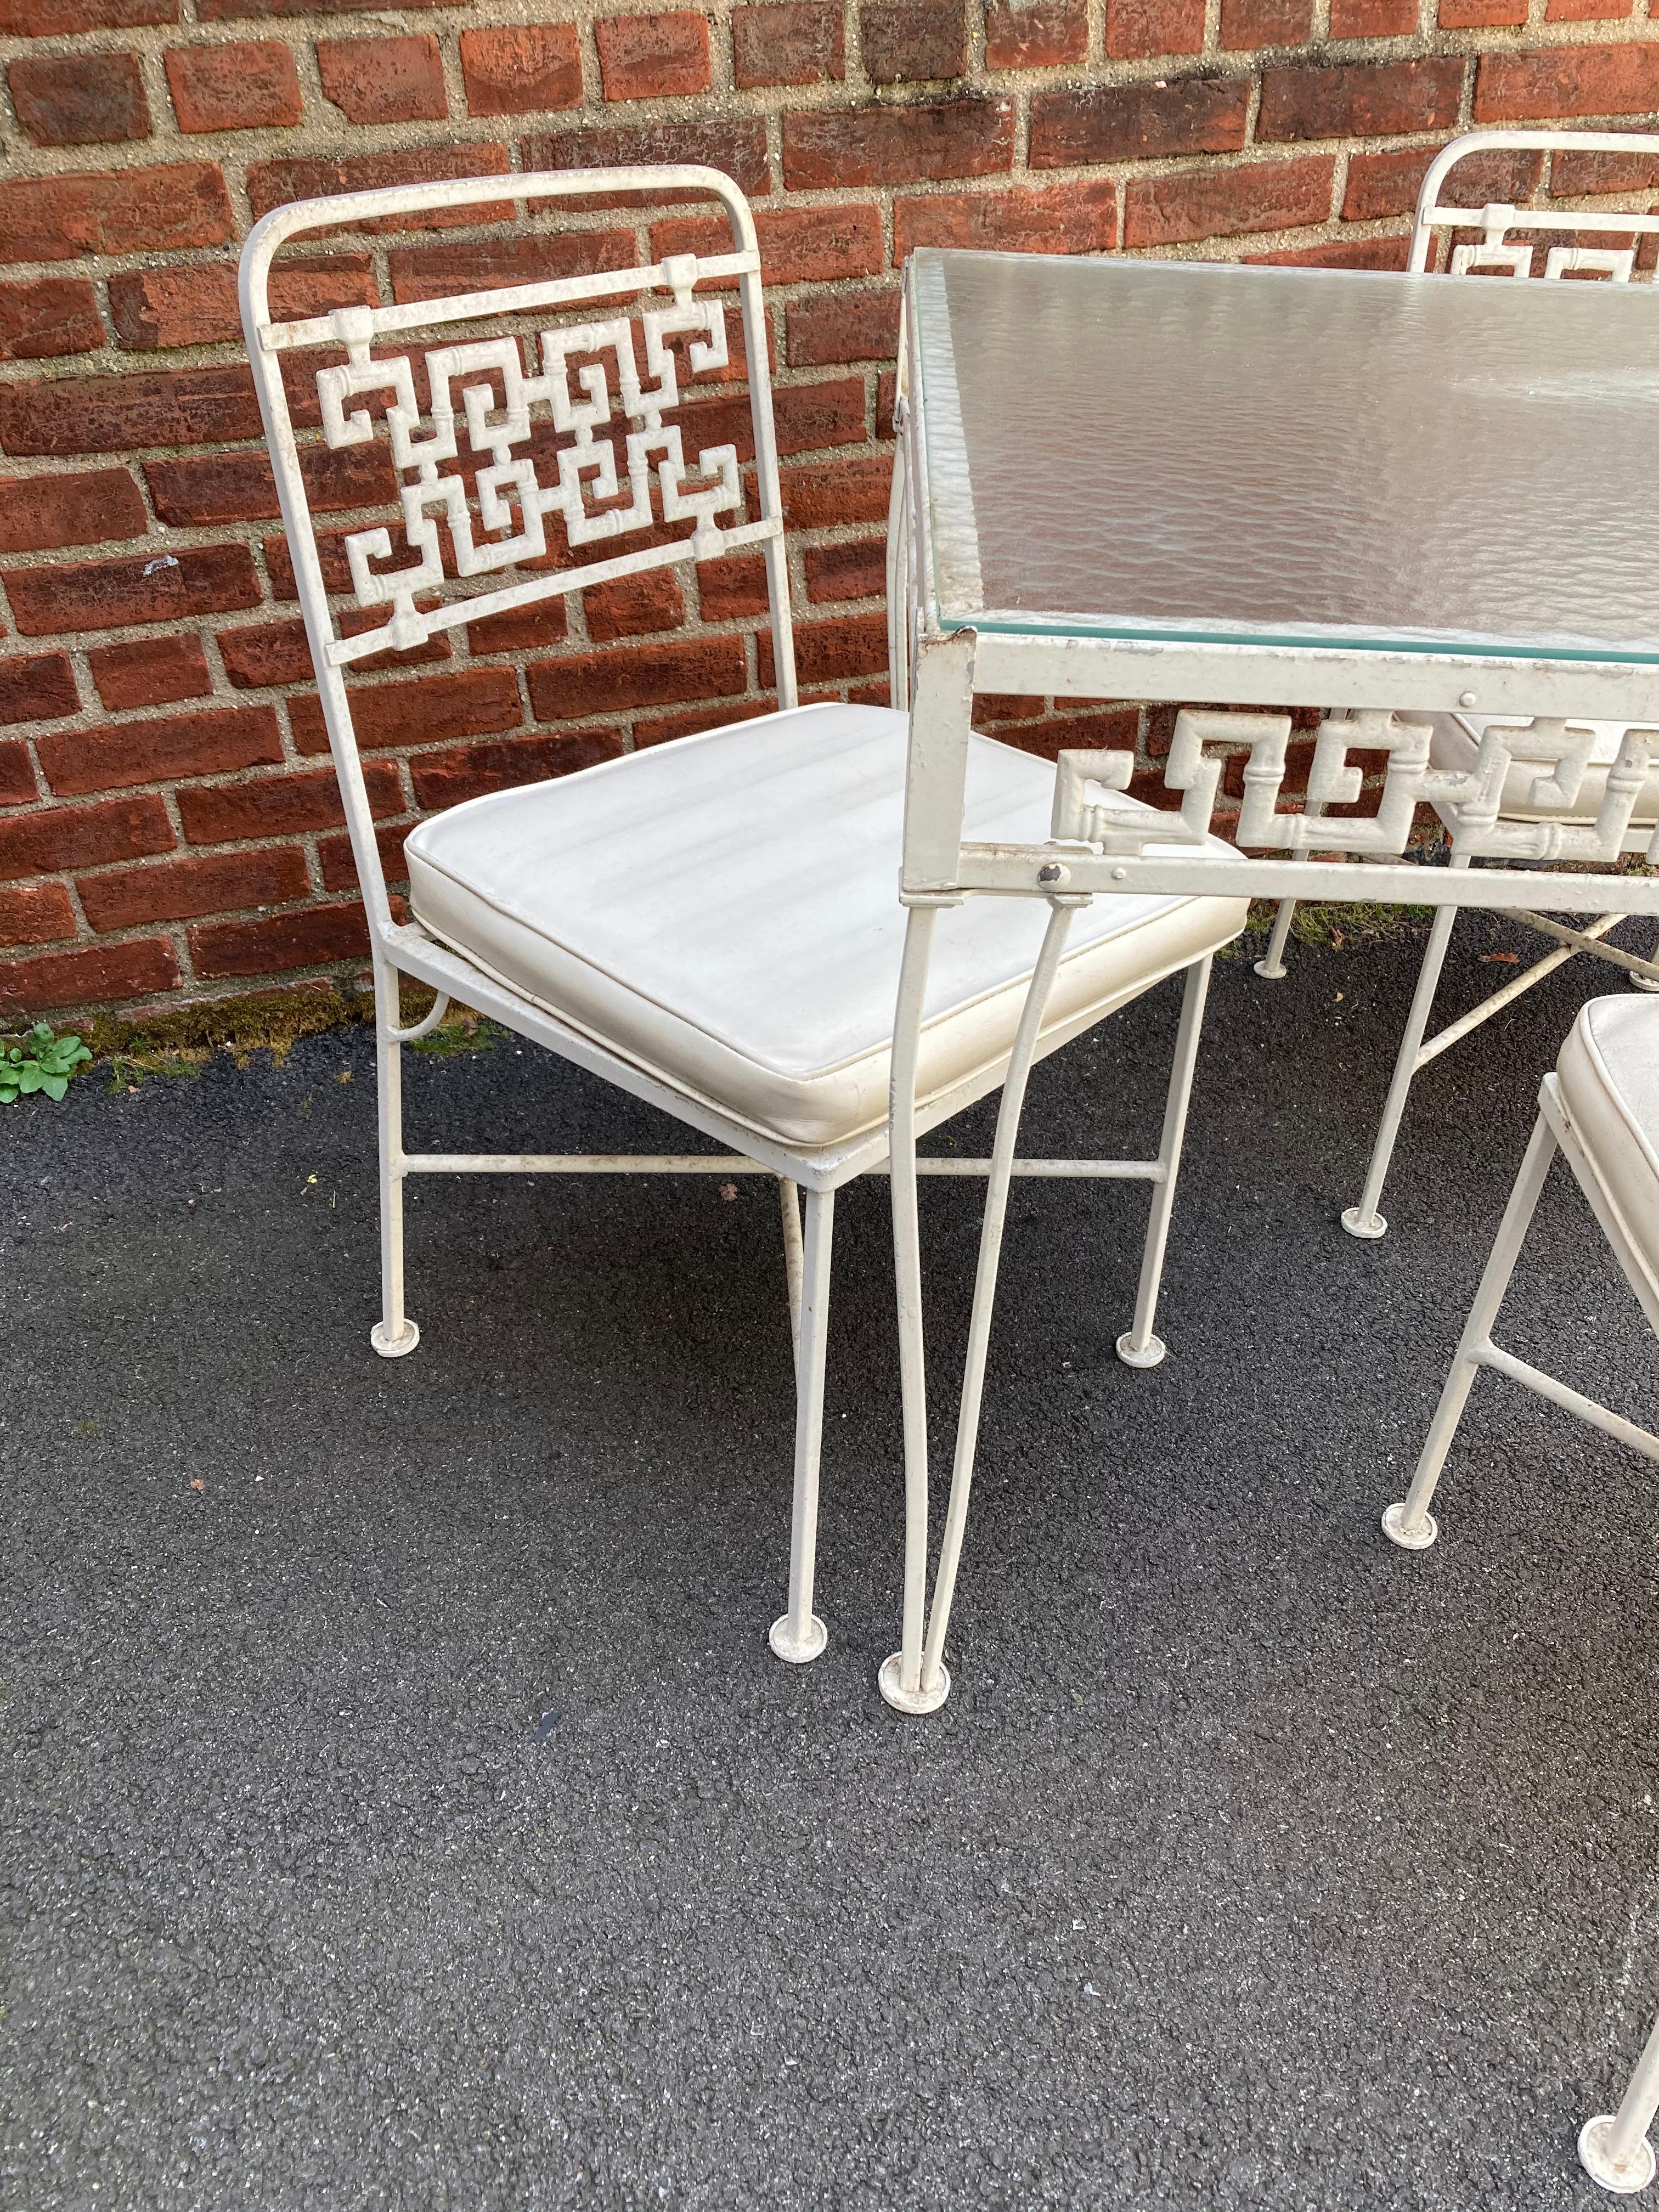 1950s Aluminum Greek Key Patio Set By Molla In Good Condition For Sale In Tarrytown, NY